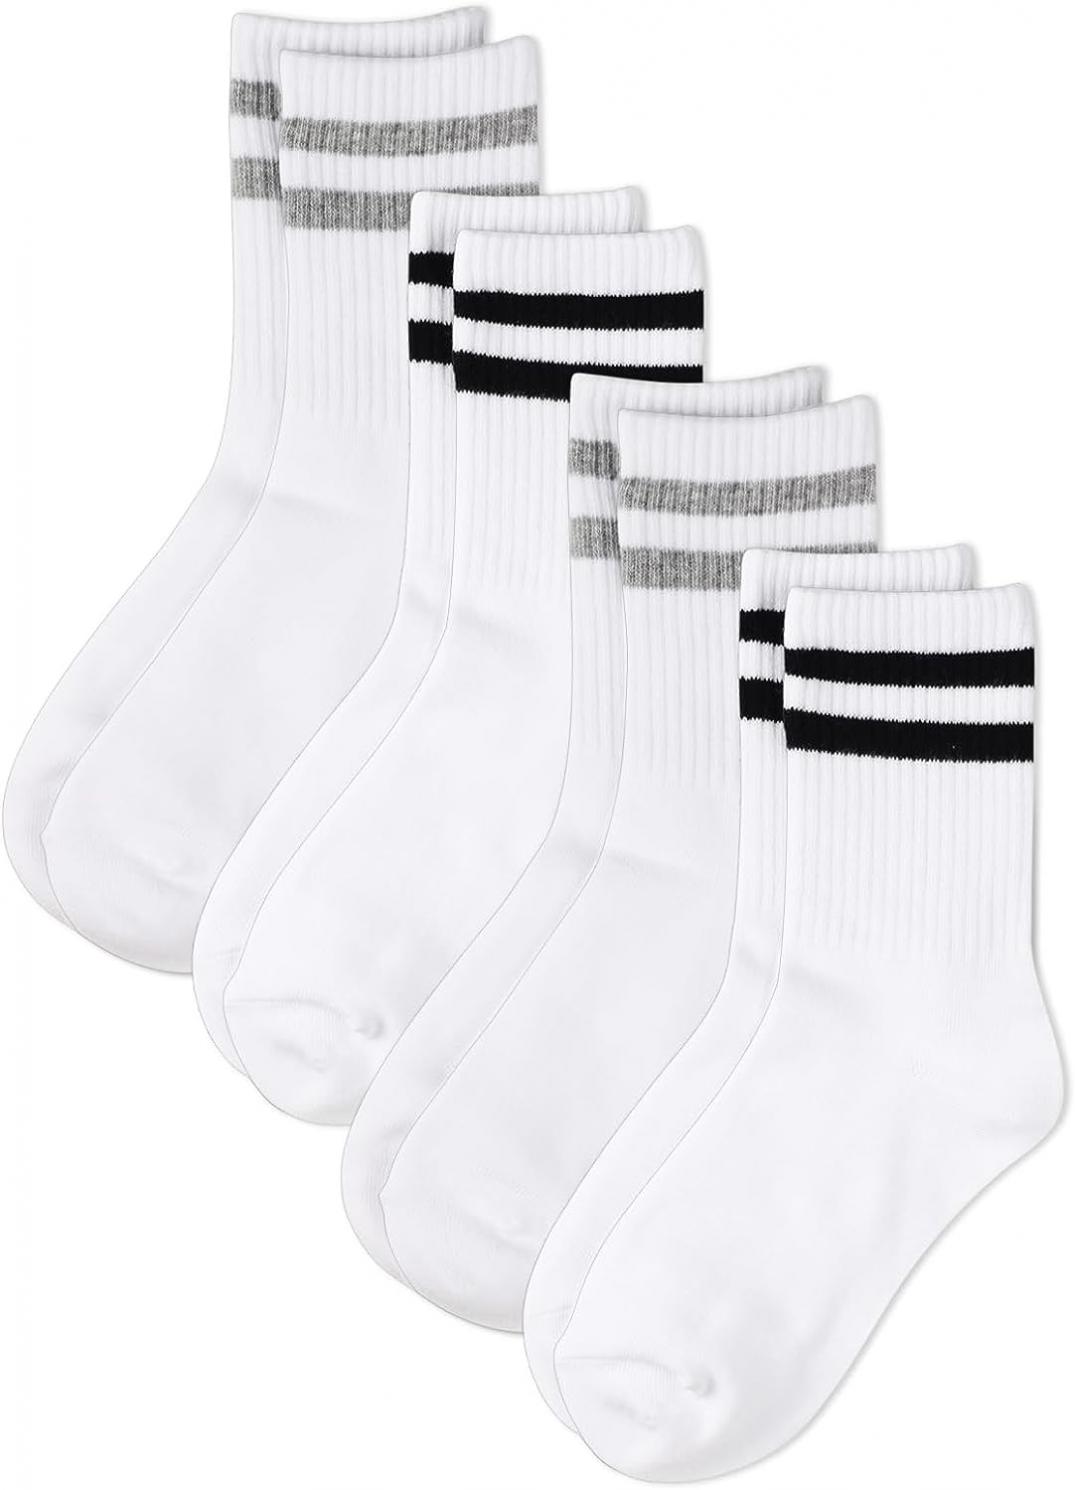 COTTON DAY Unisex Little Kids Youth Boys Girls Soft Cotton White Athletic Socks with Stripes